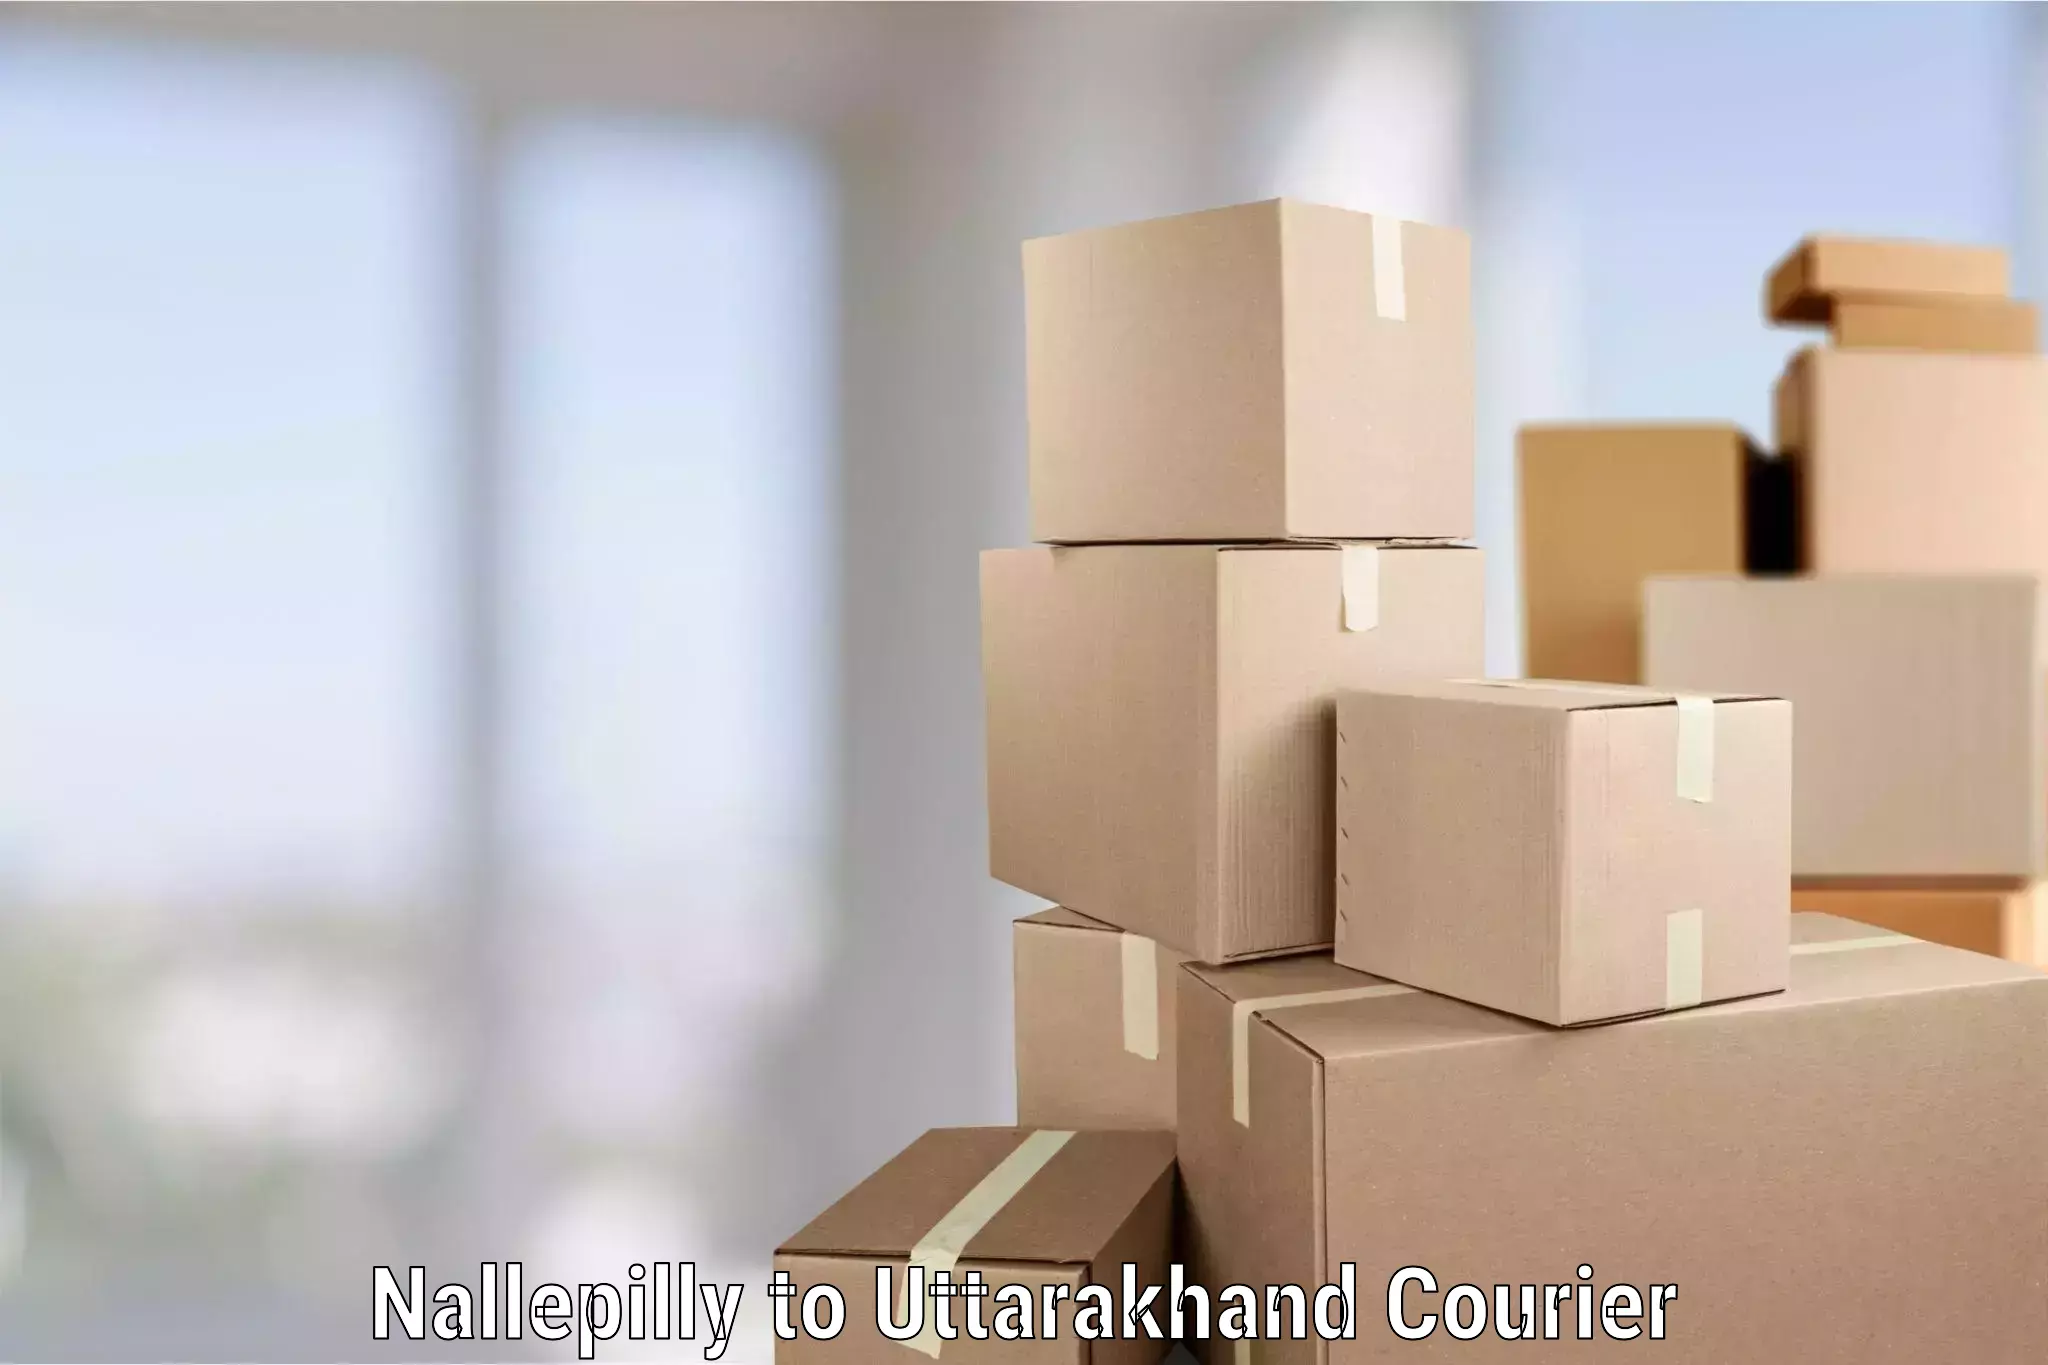 Reliable furniture movers in Nallepilly to Someshwar